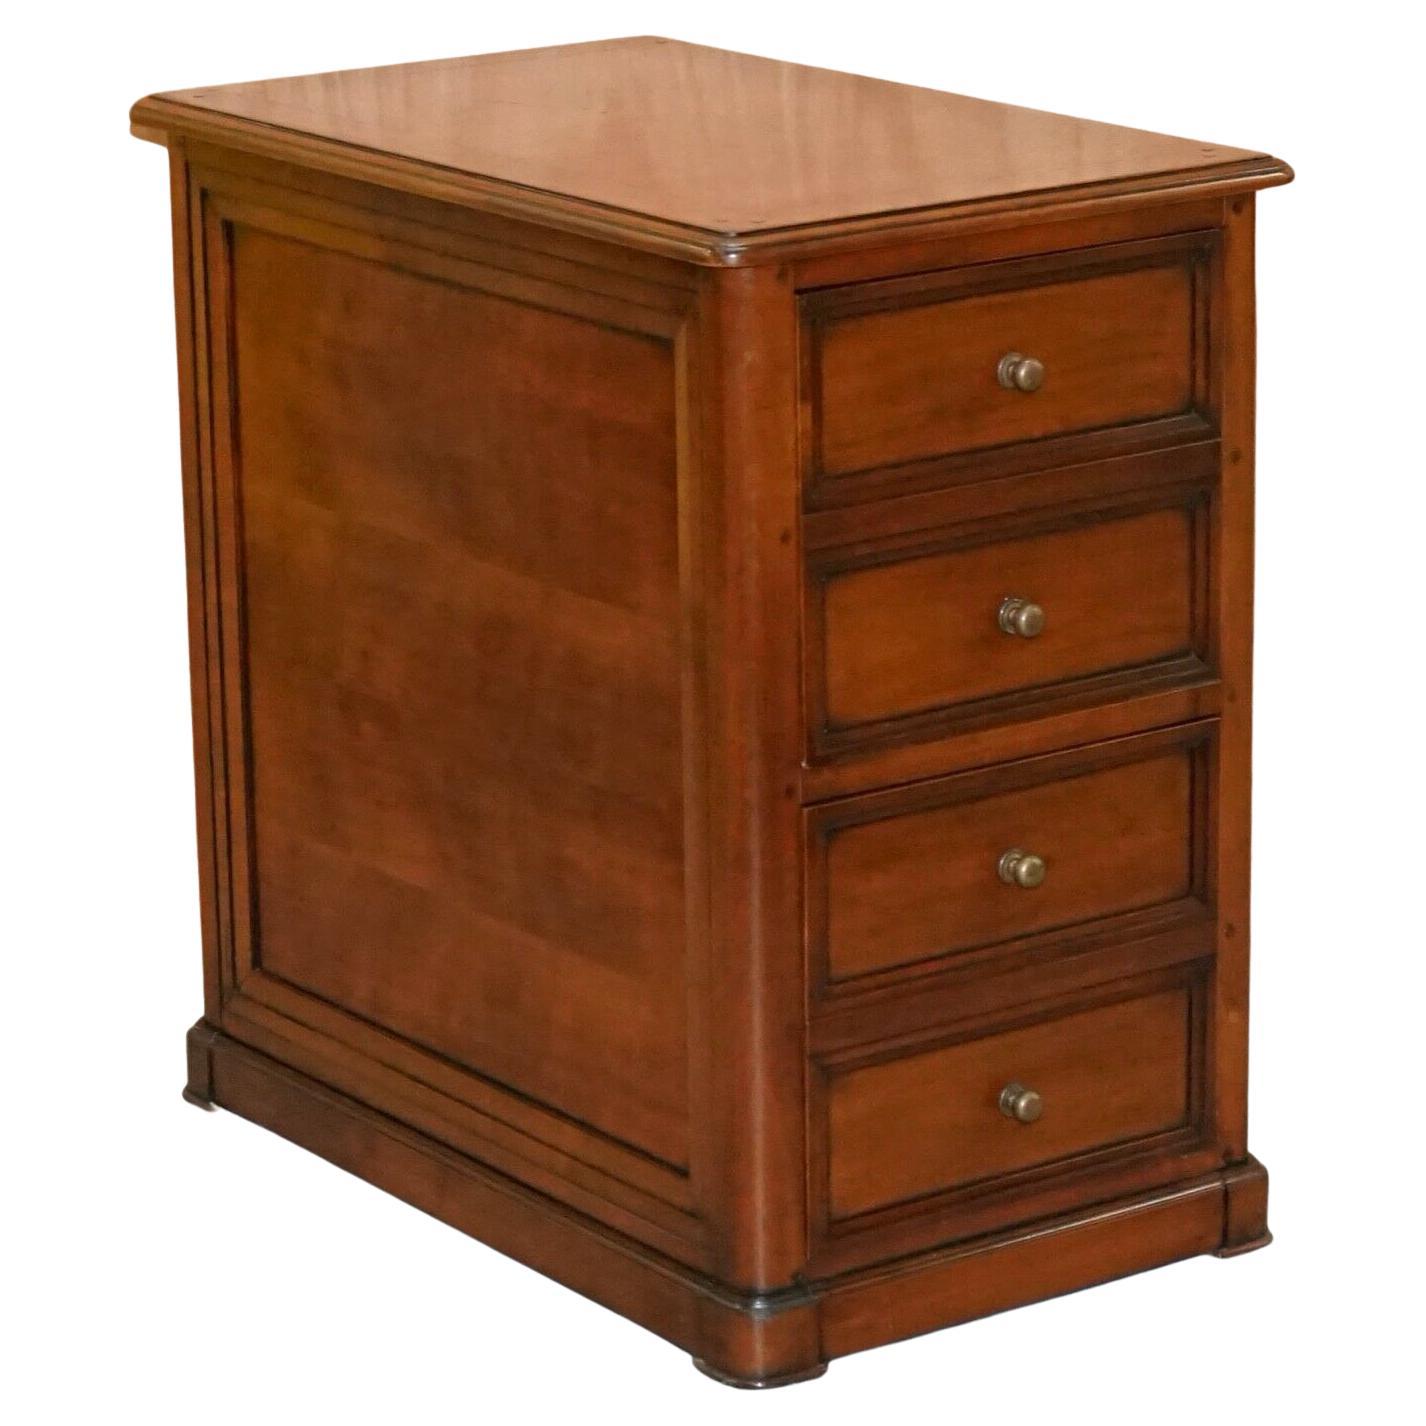 Stunning French Cherrywood Filing Office Cabinet